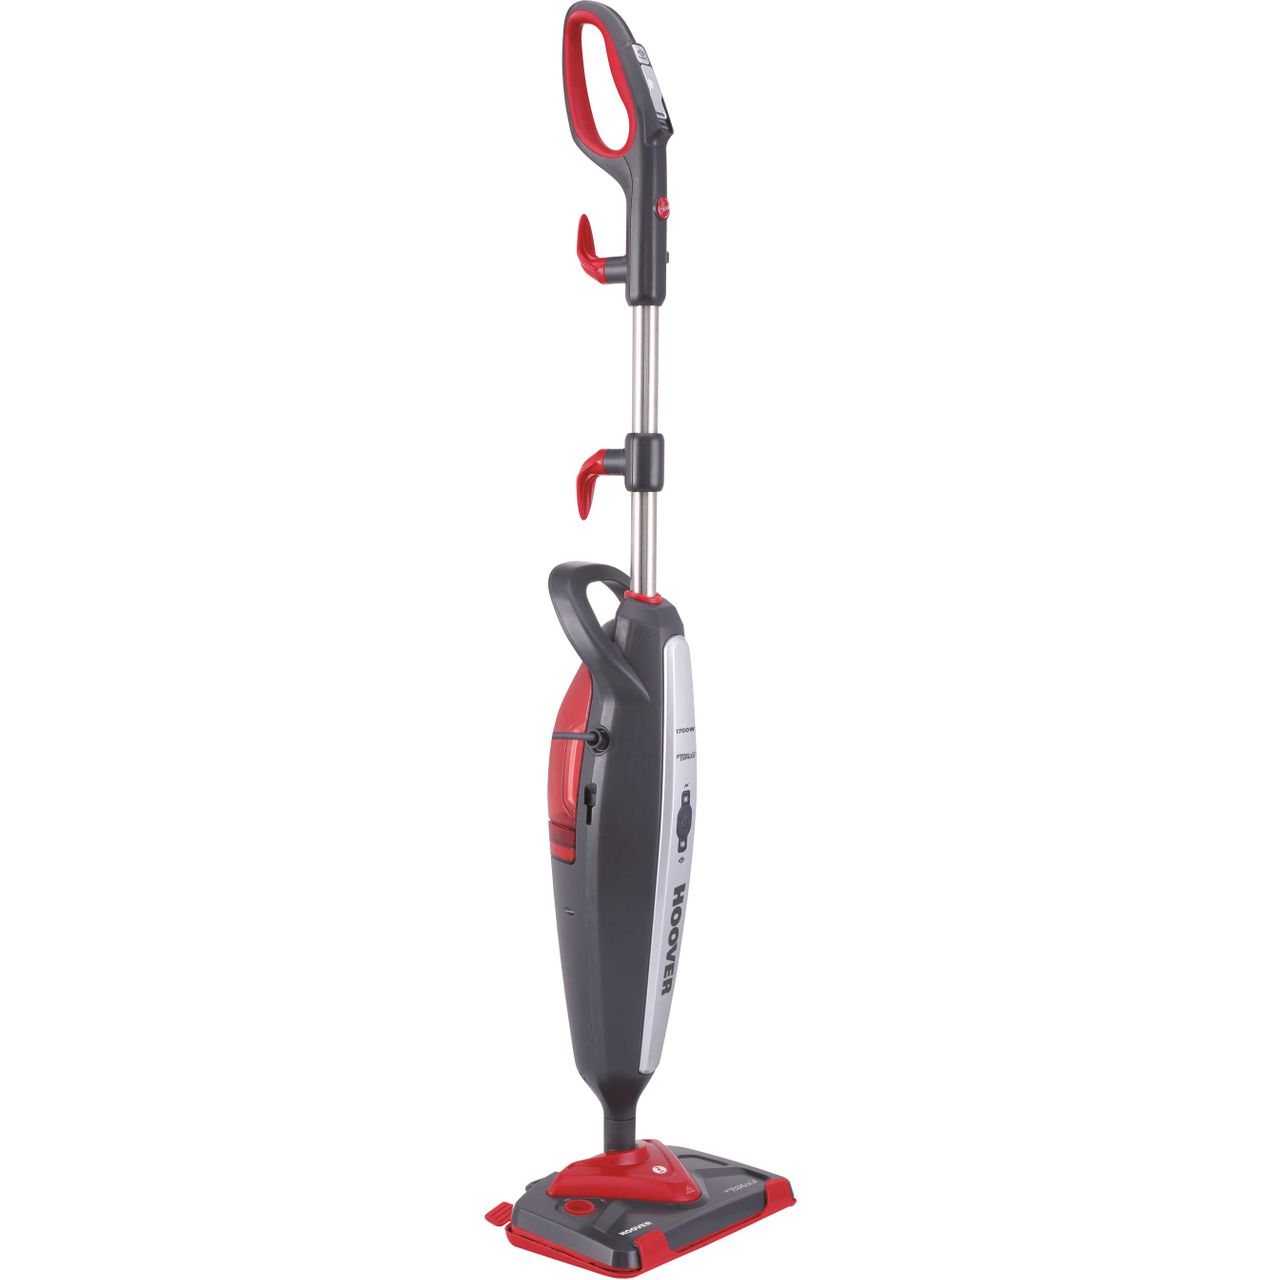 Hoover CAD1700D Steam Cleaner Review